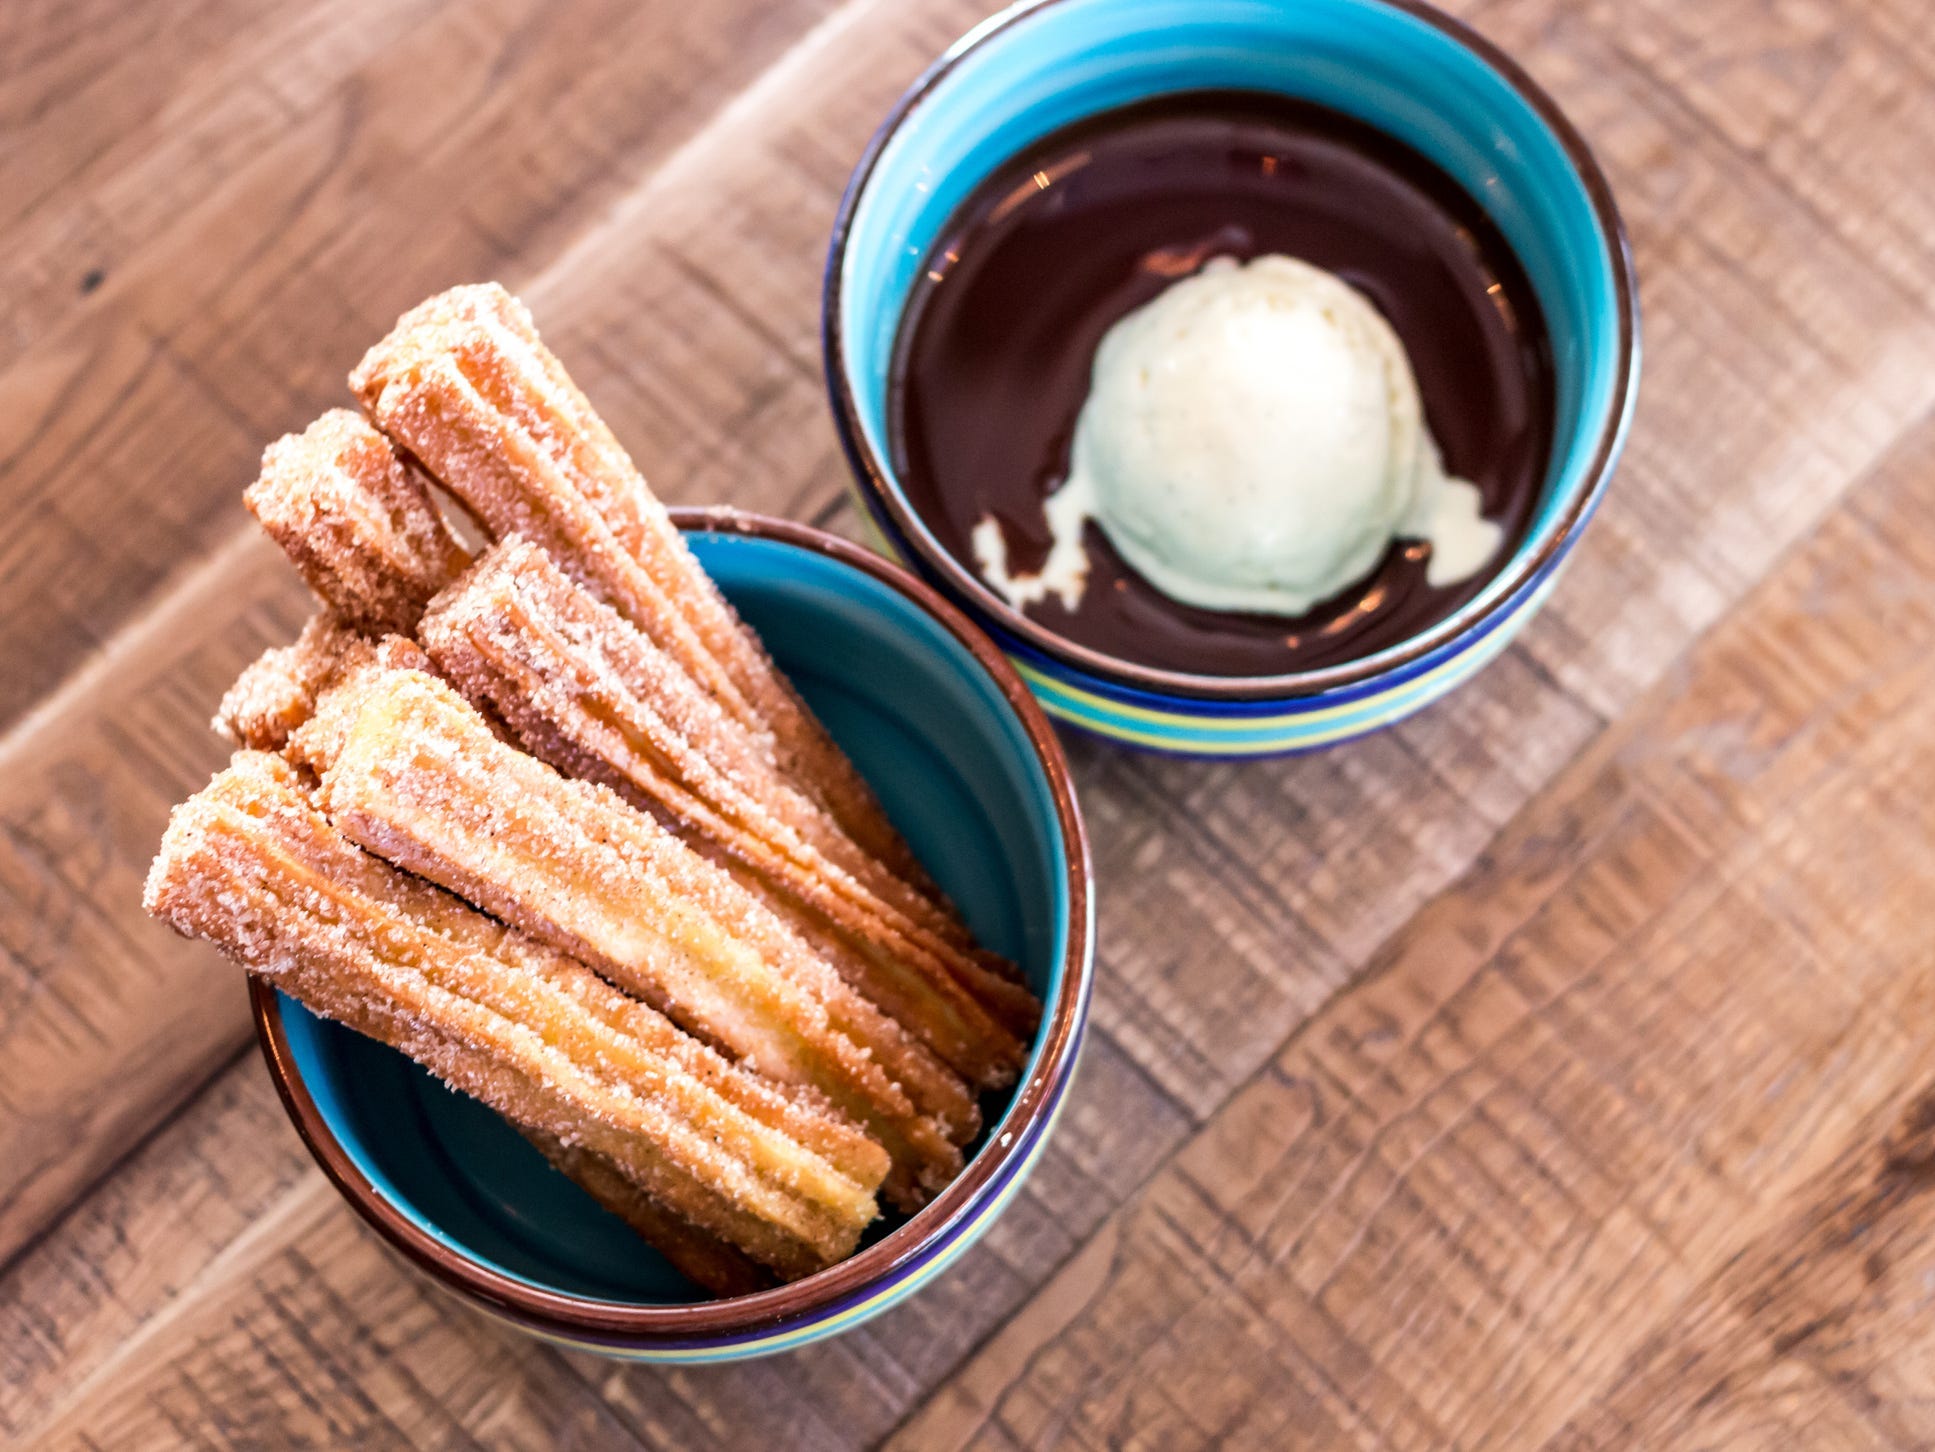 Churros covered in cinnamon sugar stacked vertically in a mug next to a mug filled with chocolate sauce and ice cream